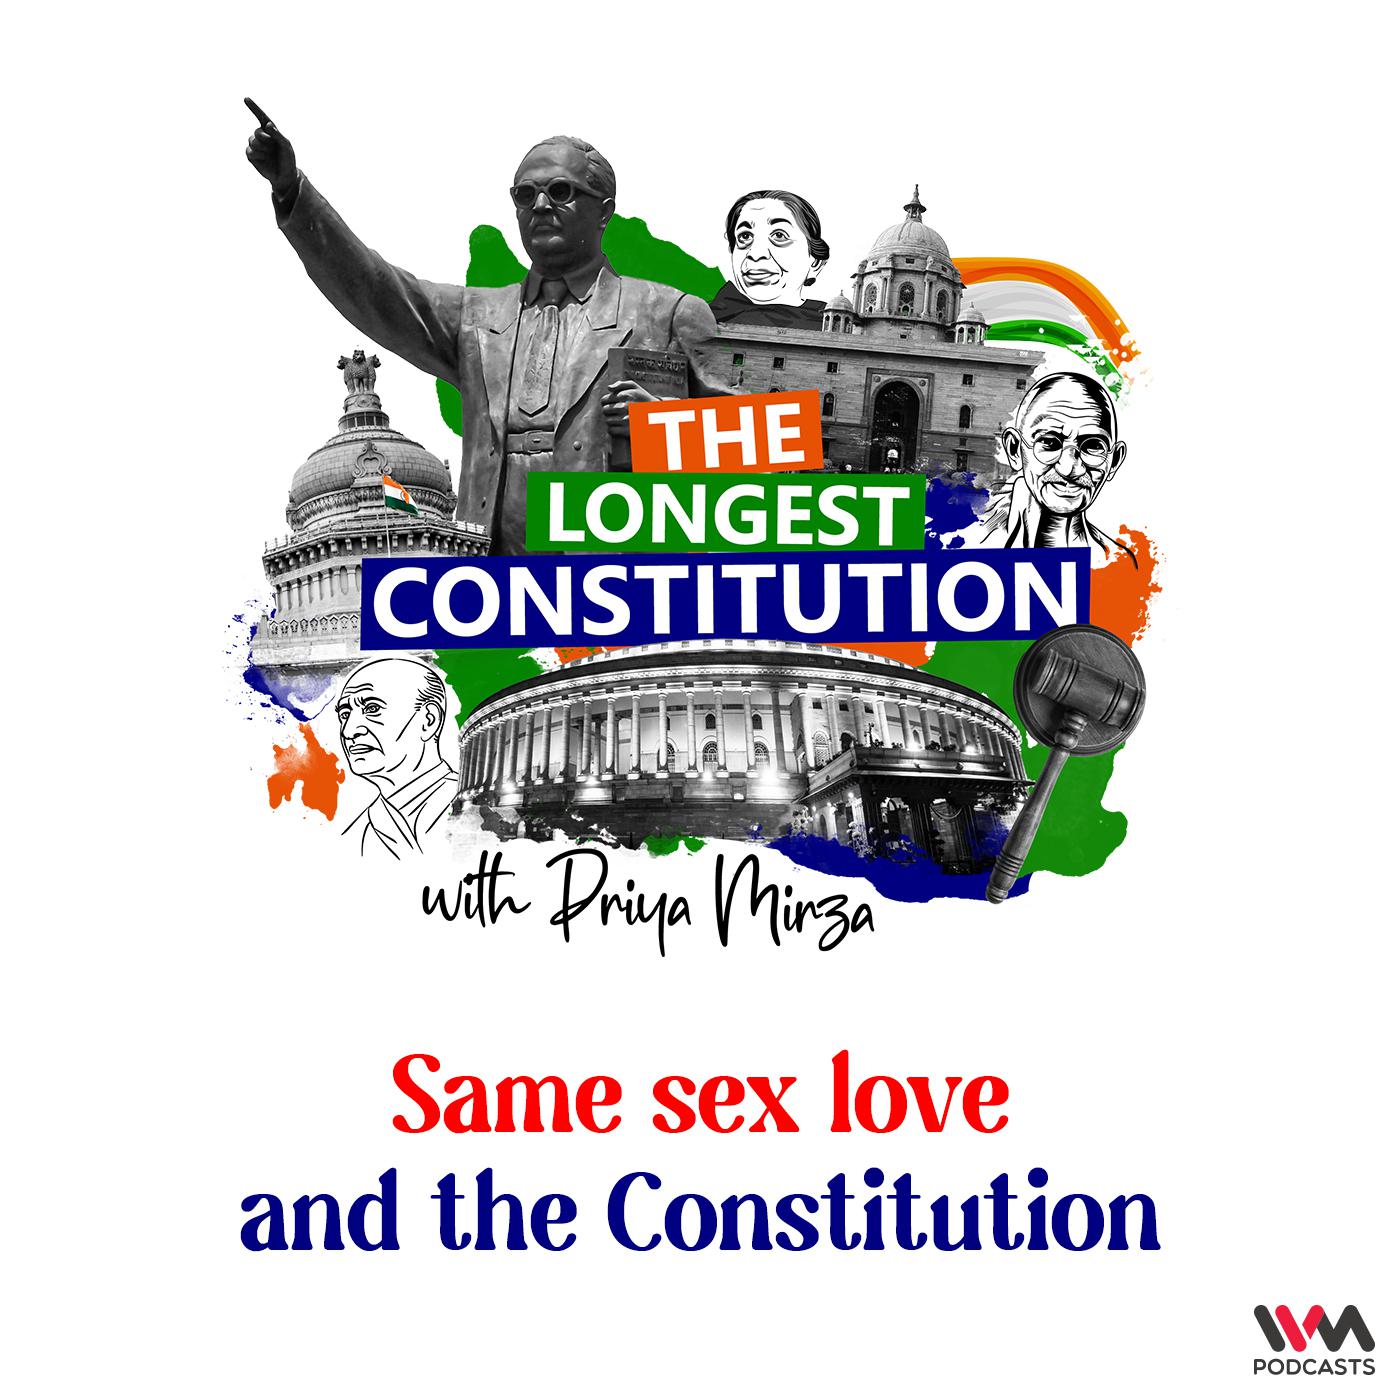 Same sex love and the Constitution